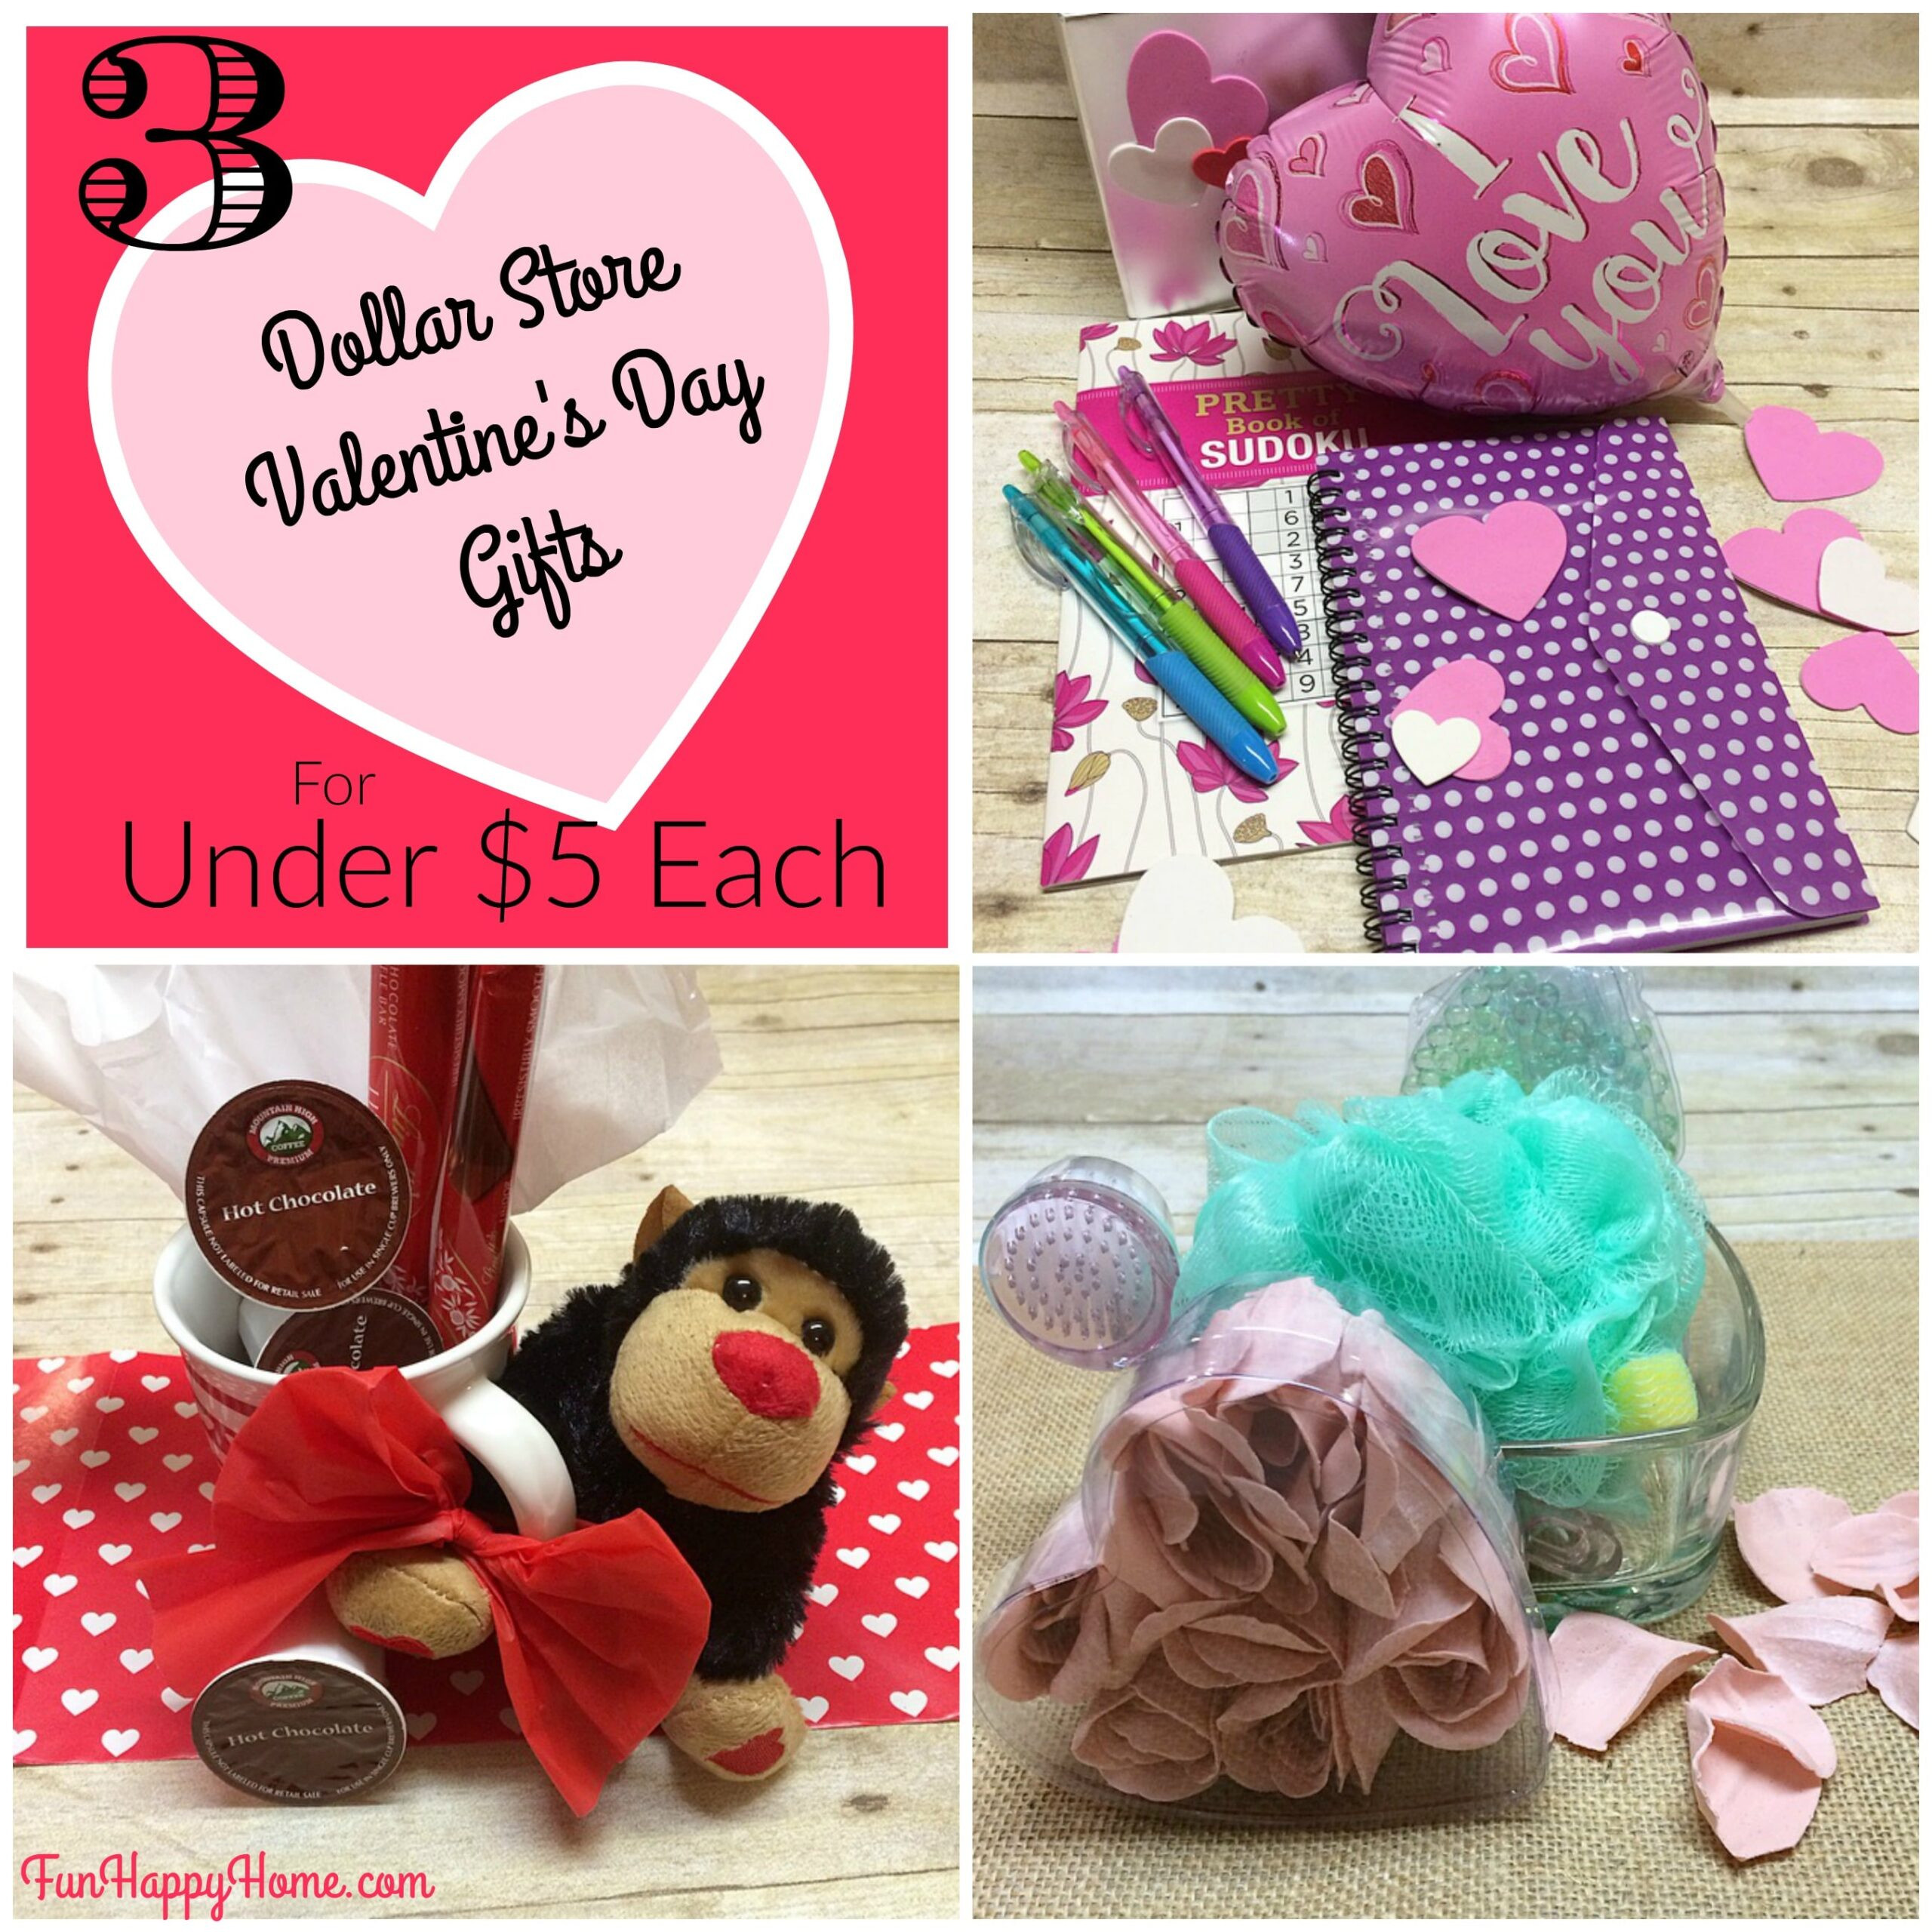 Good Valentine Day Gift Ideas
 3 Easy Dollar Store Valentine s Day Gifts Fun Happy Home